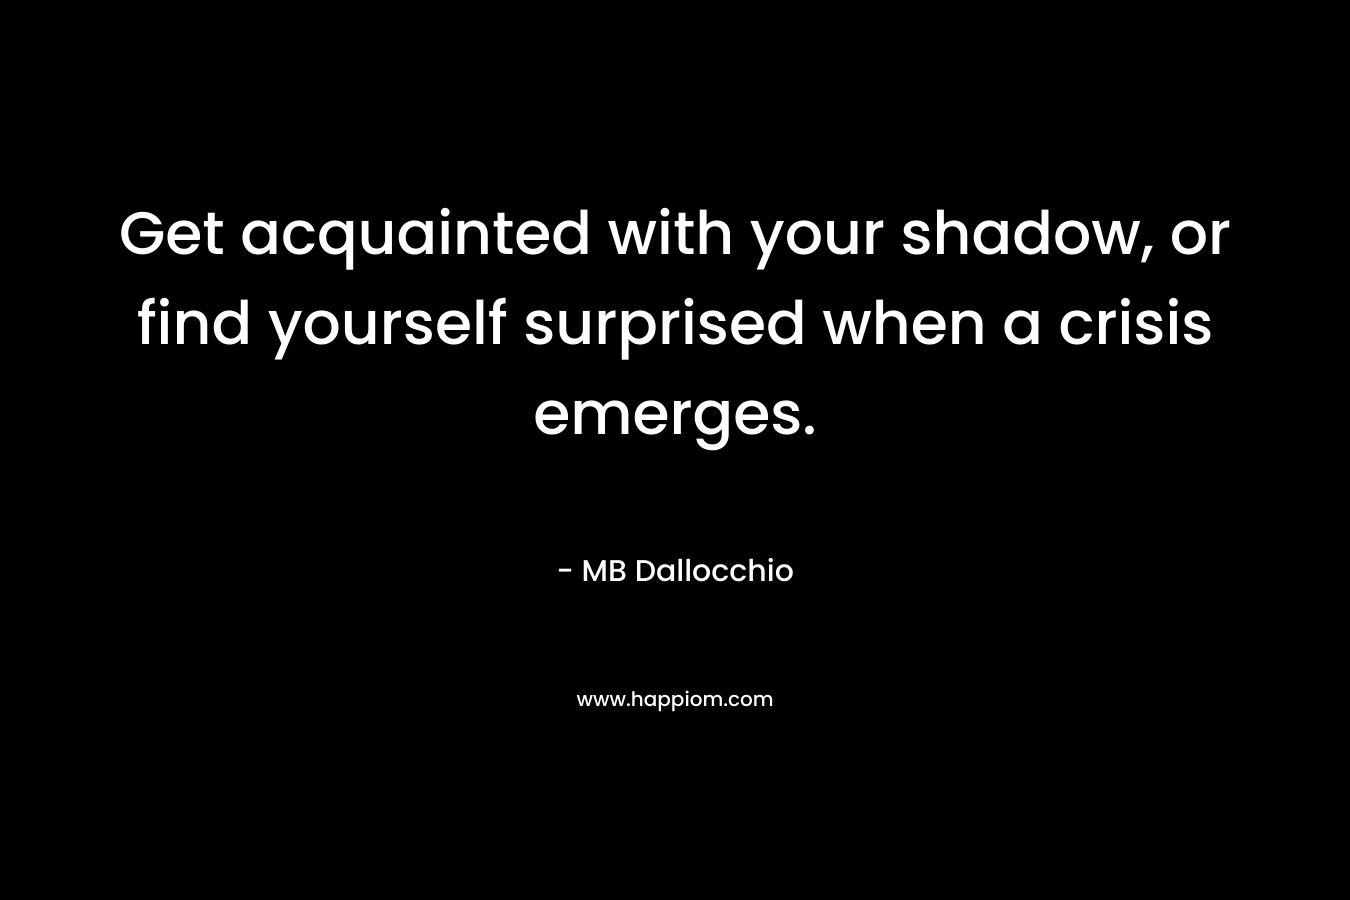 Get acquainted with your shadow, or find yourself surprised when a crisis emerges.